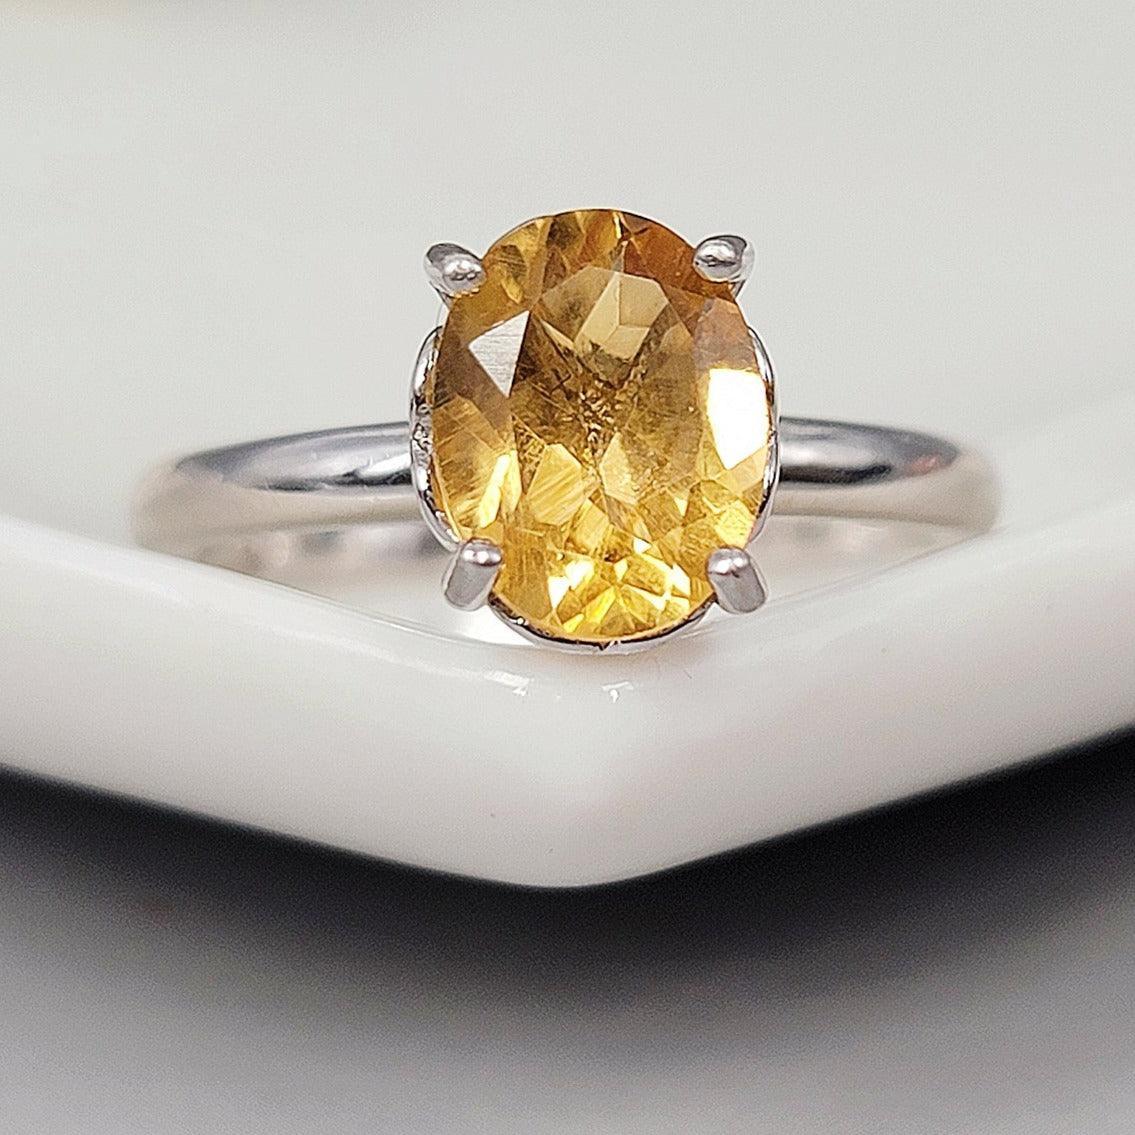 Natural Citrine Heart Ring - Uniquelan Jewelry